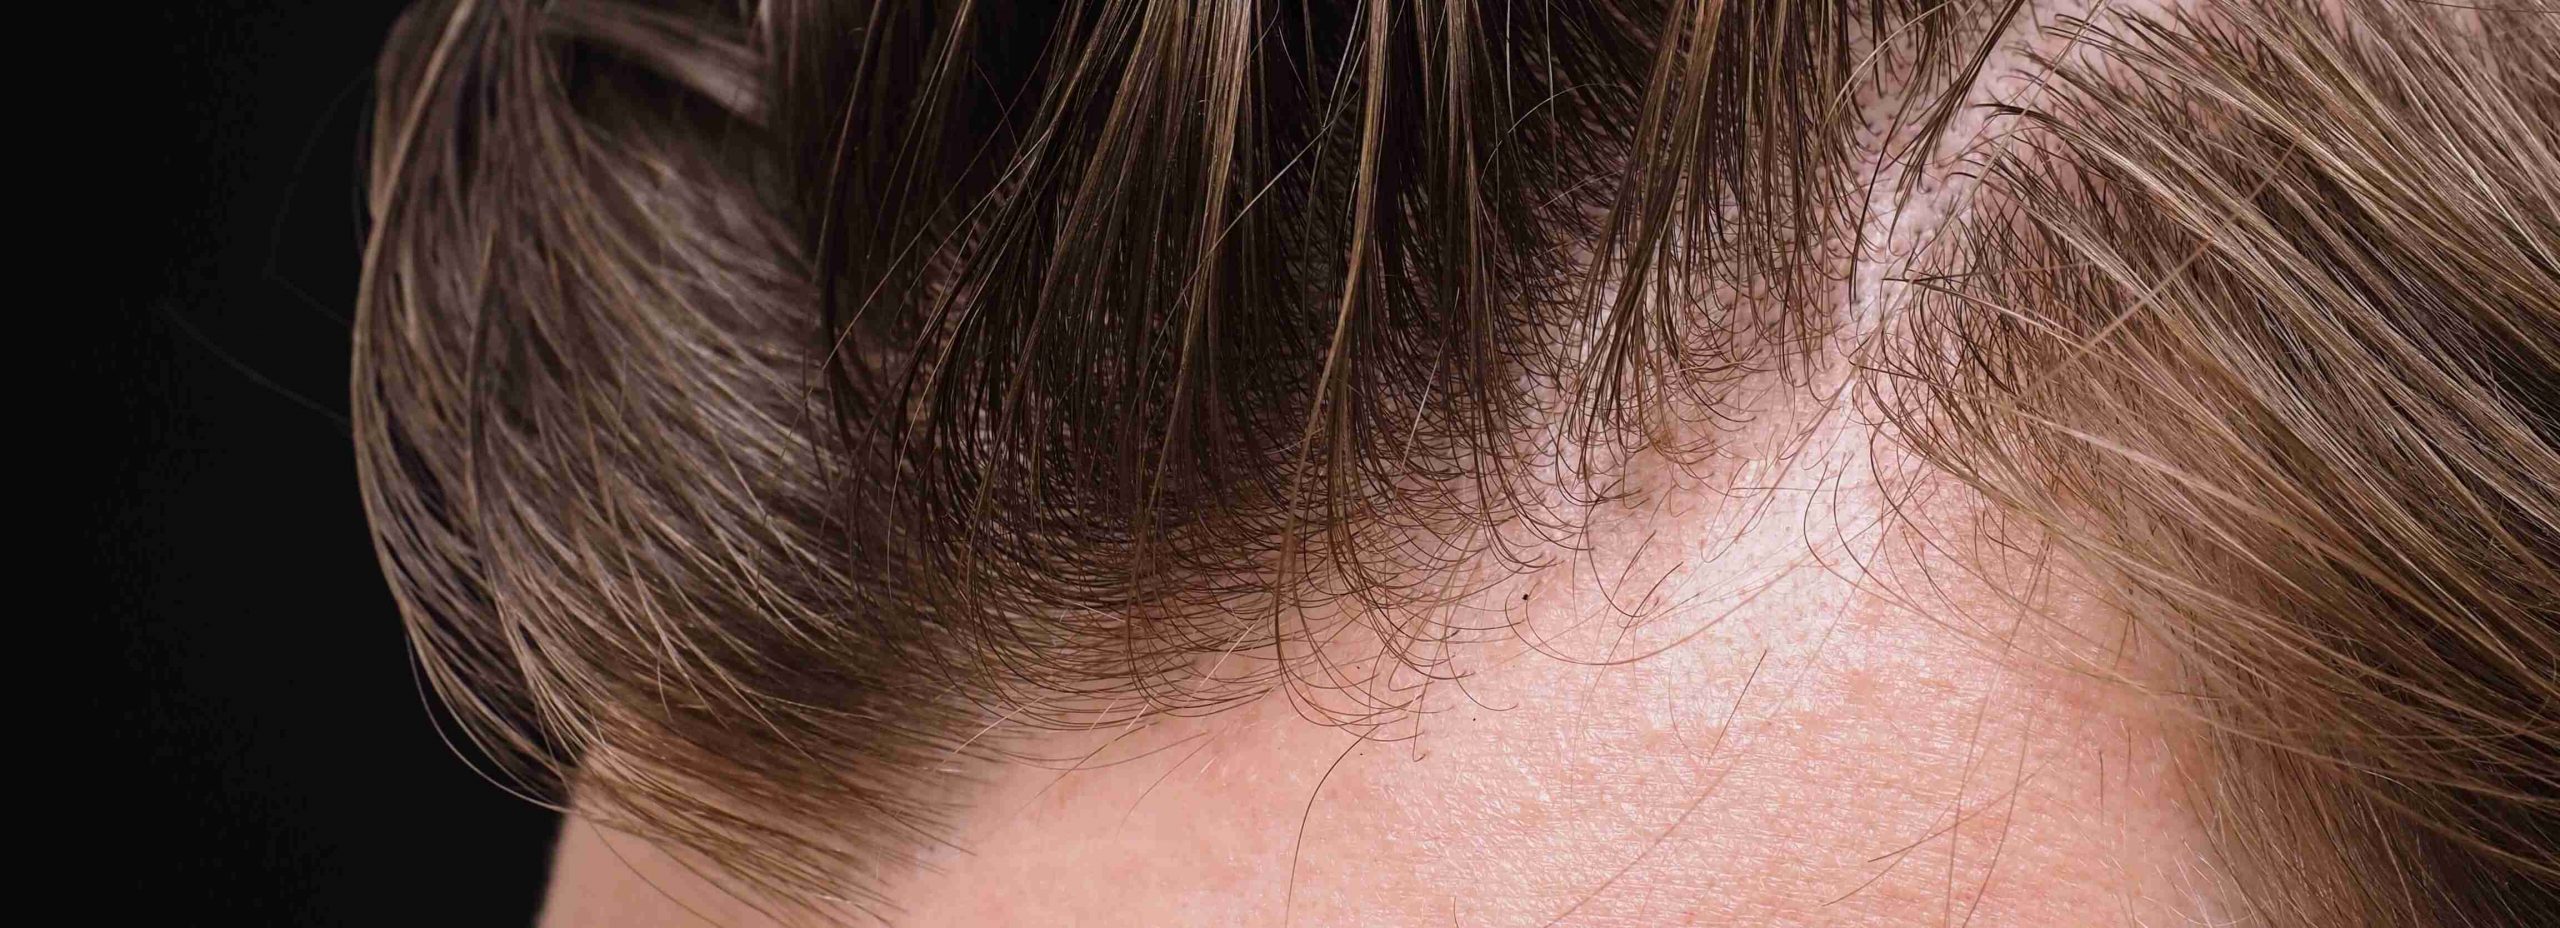 Is Hair Loss Caused by Testosterone?